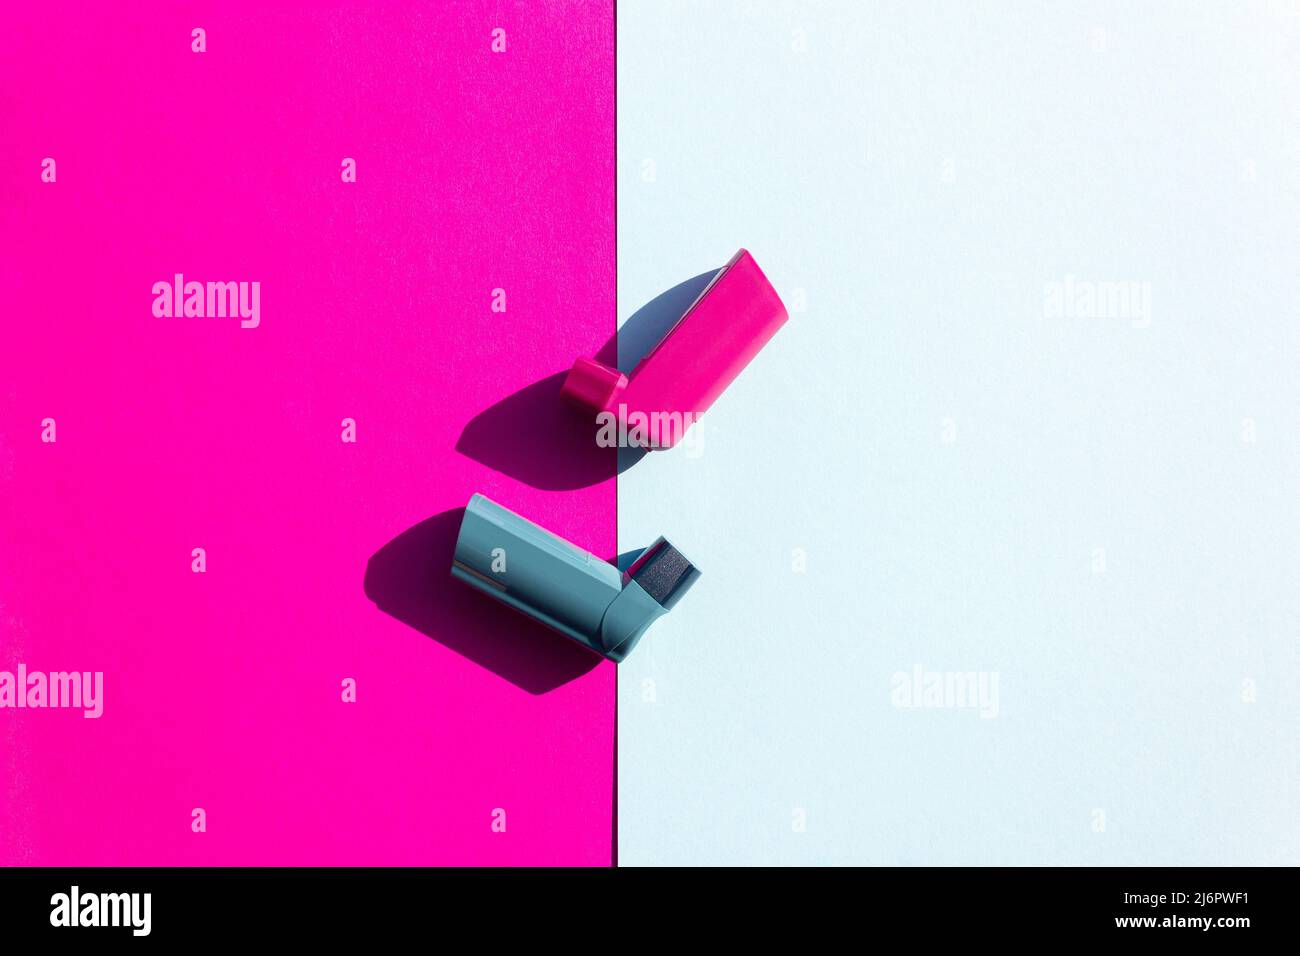 Creative asthma concept. Blue and pink asthma inhalers on a blue and pink background. Flat lay. Cope space. Stock Photo